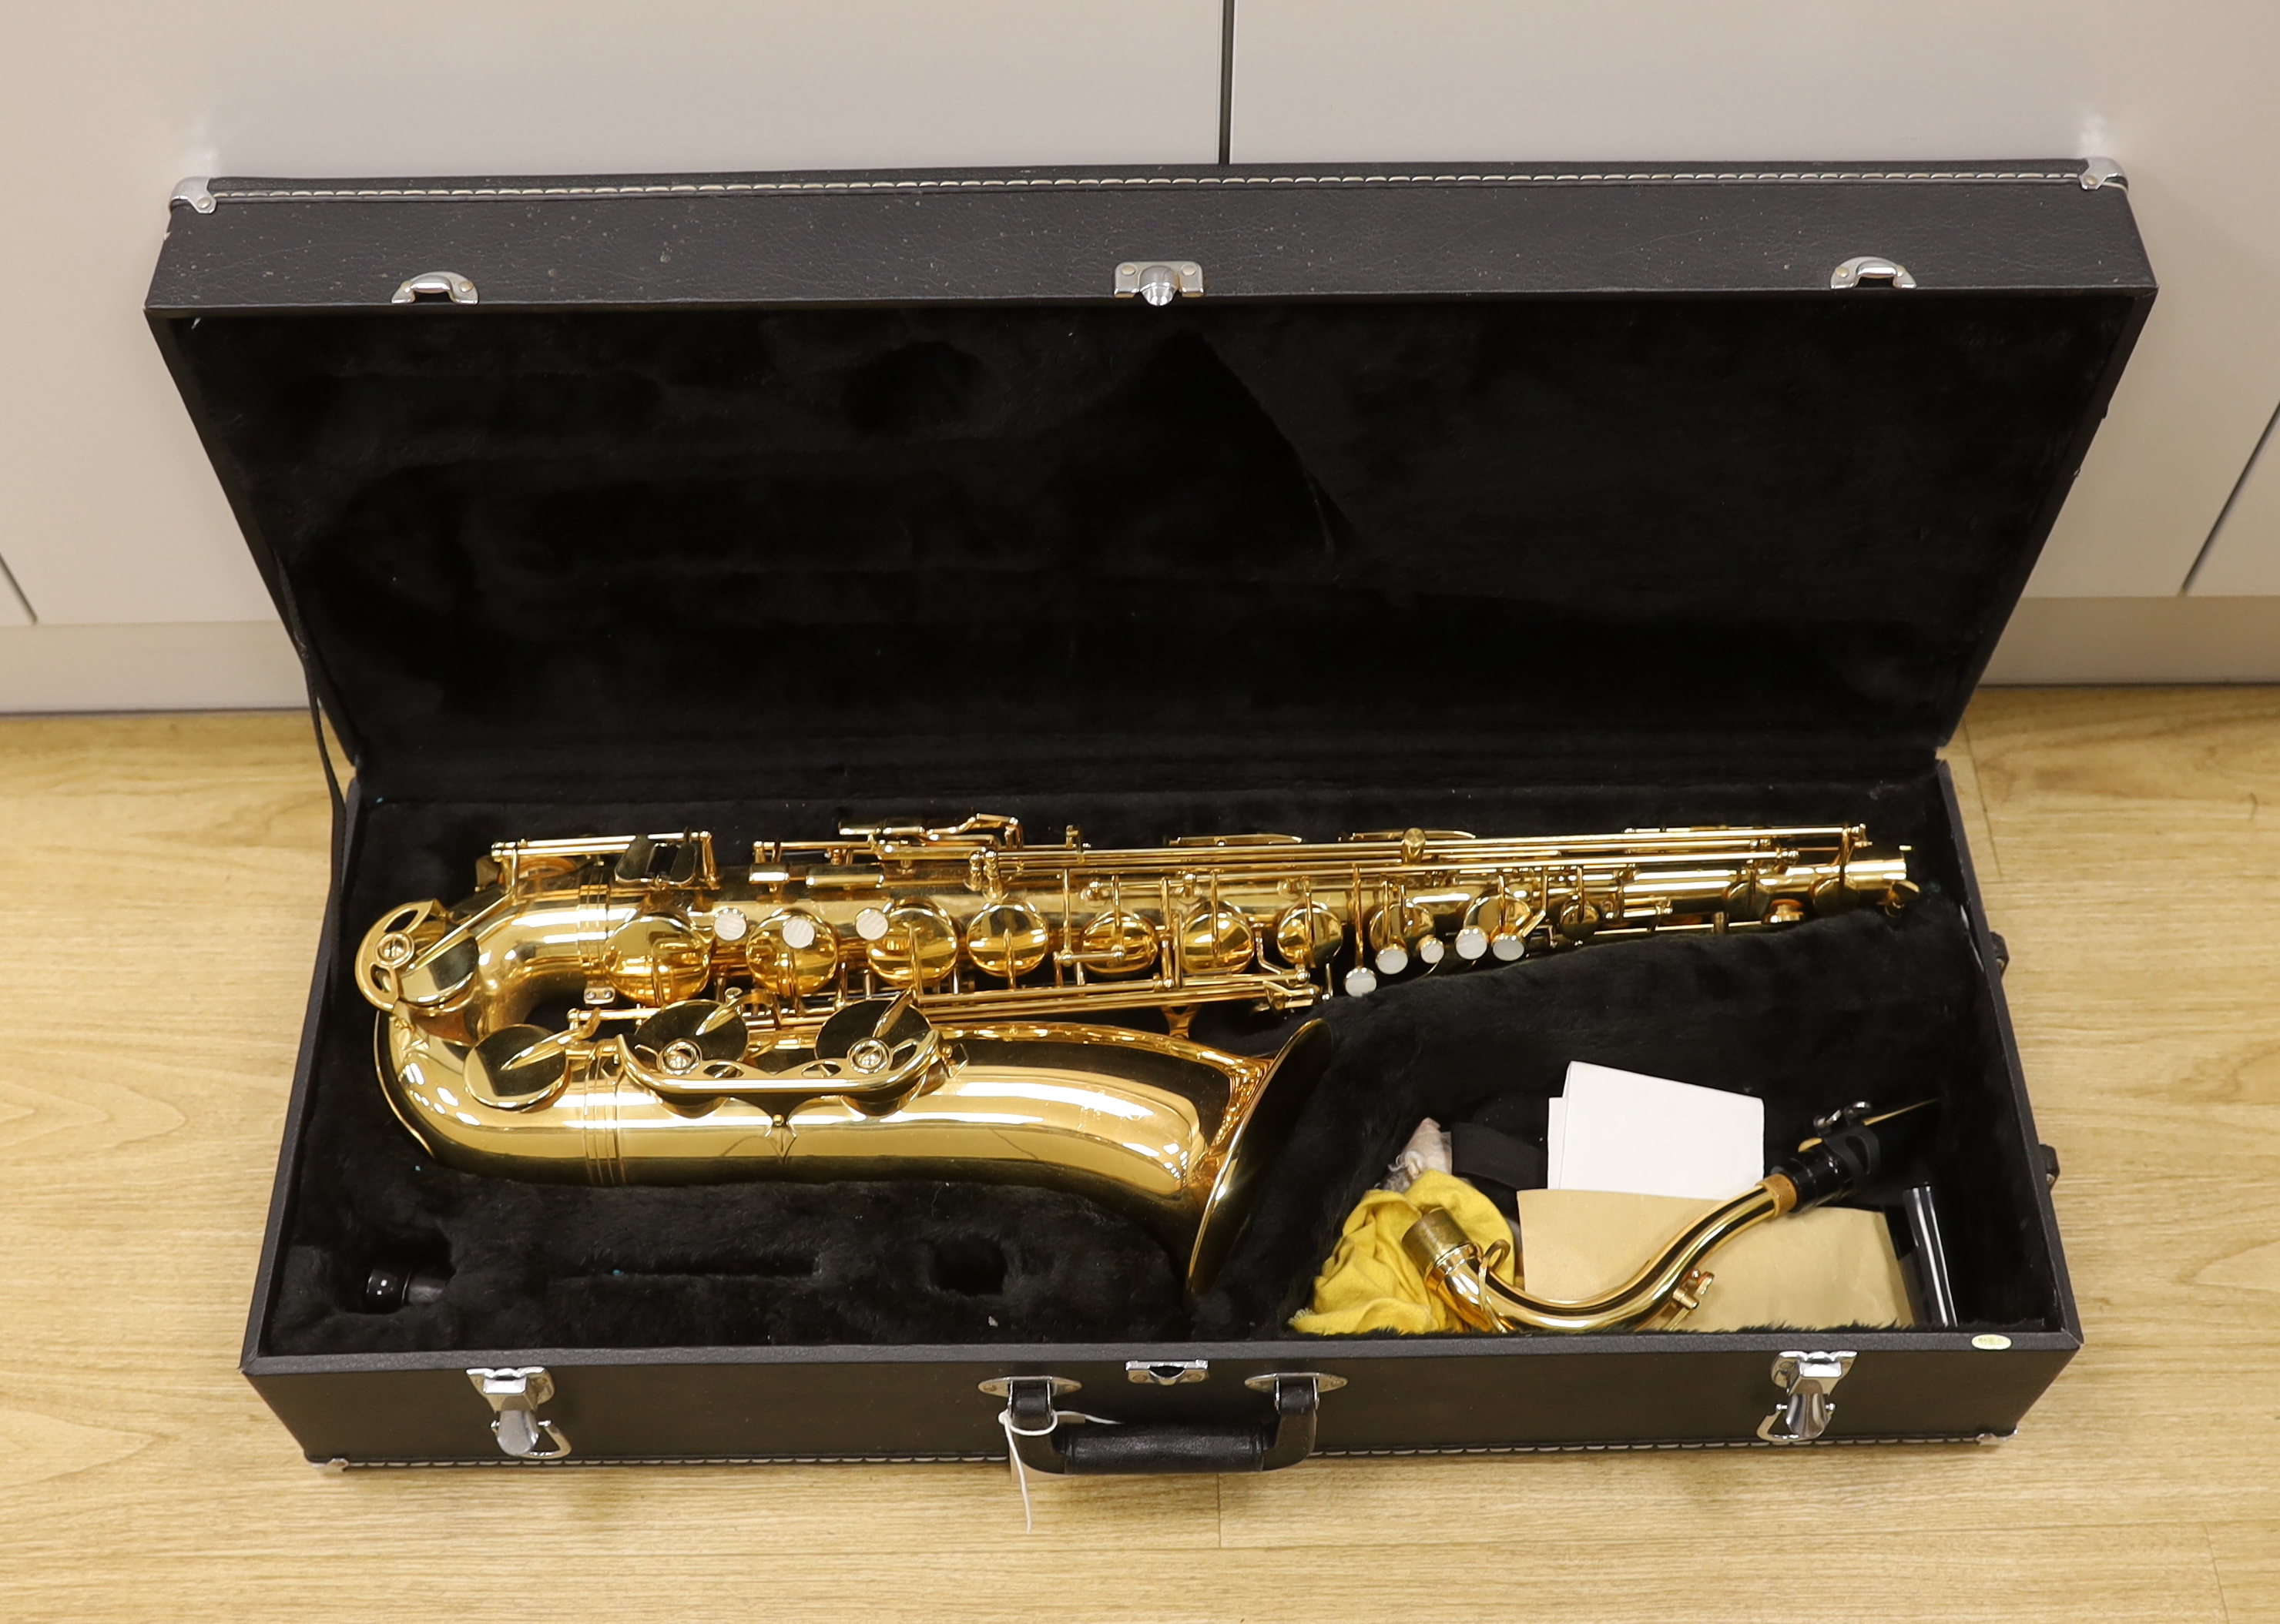 A Jupiter saxophone with fitted case                                                                                                                                                                                        